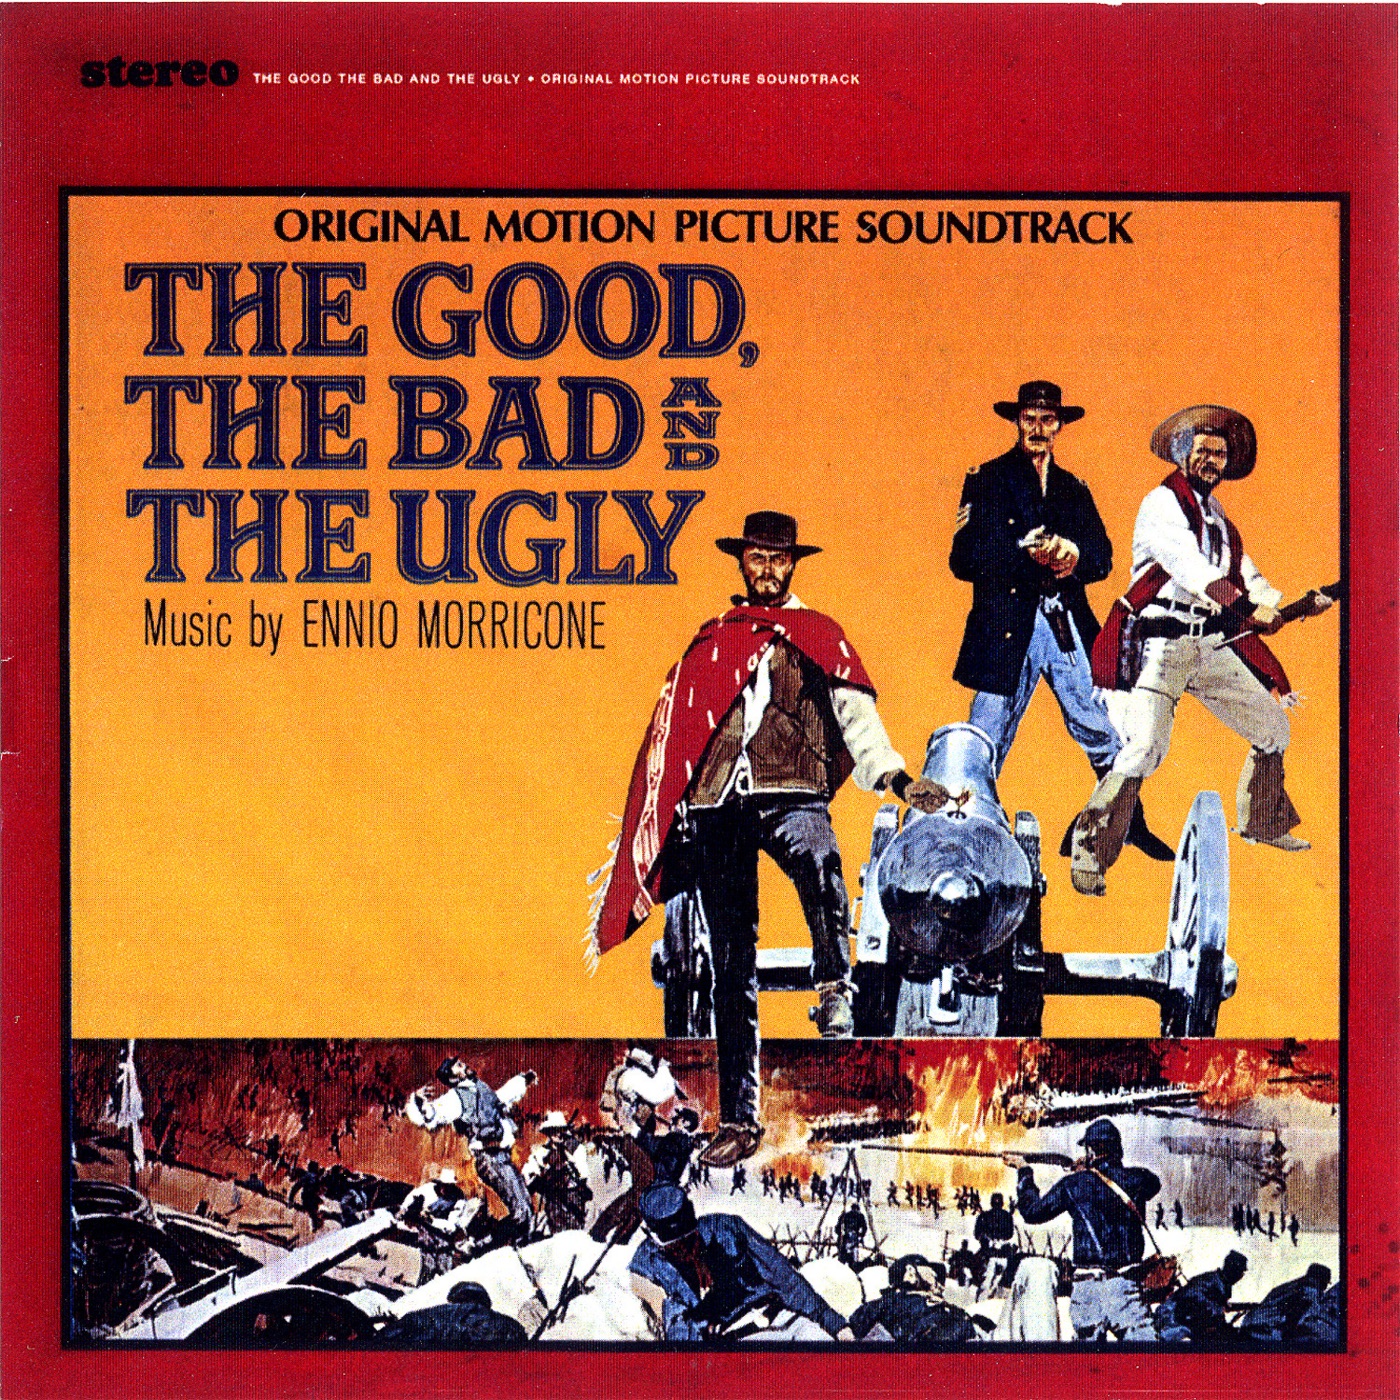 The Good, The Bad And The Ugly (Original Motion Picture Soundtrack / (Remastered & Expanded)) by Ennio Morricone